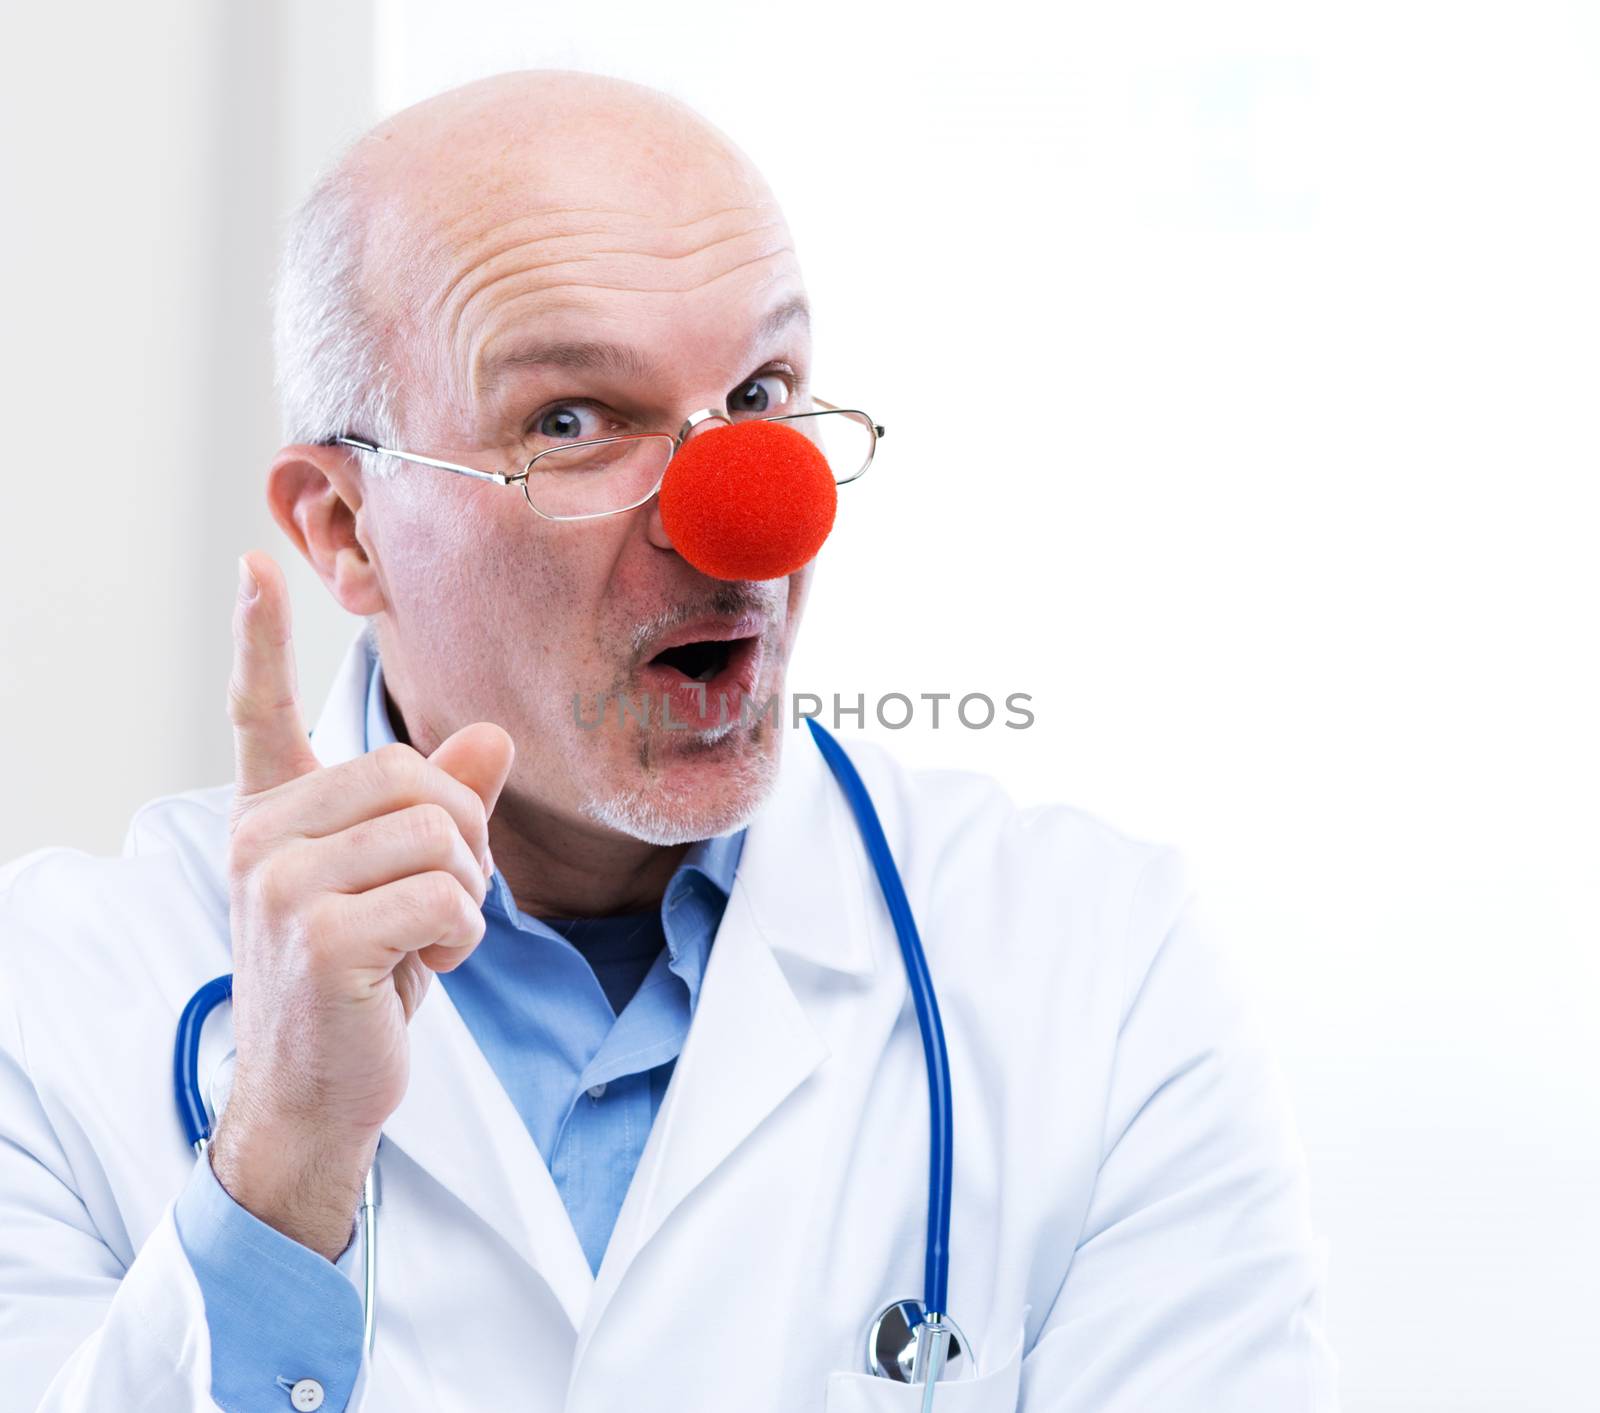 Clown doctor portrait with medical equipment.